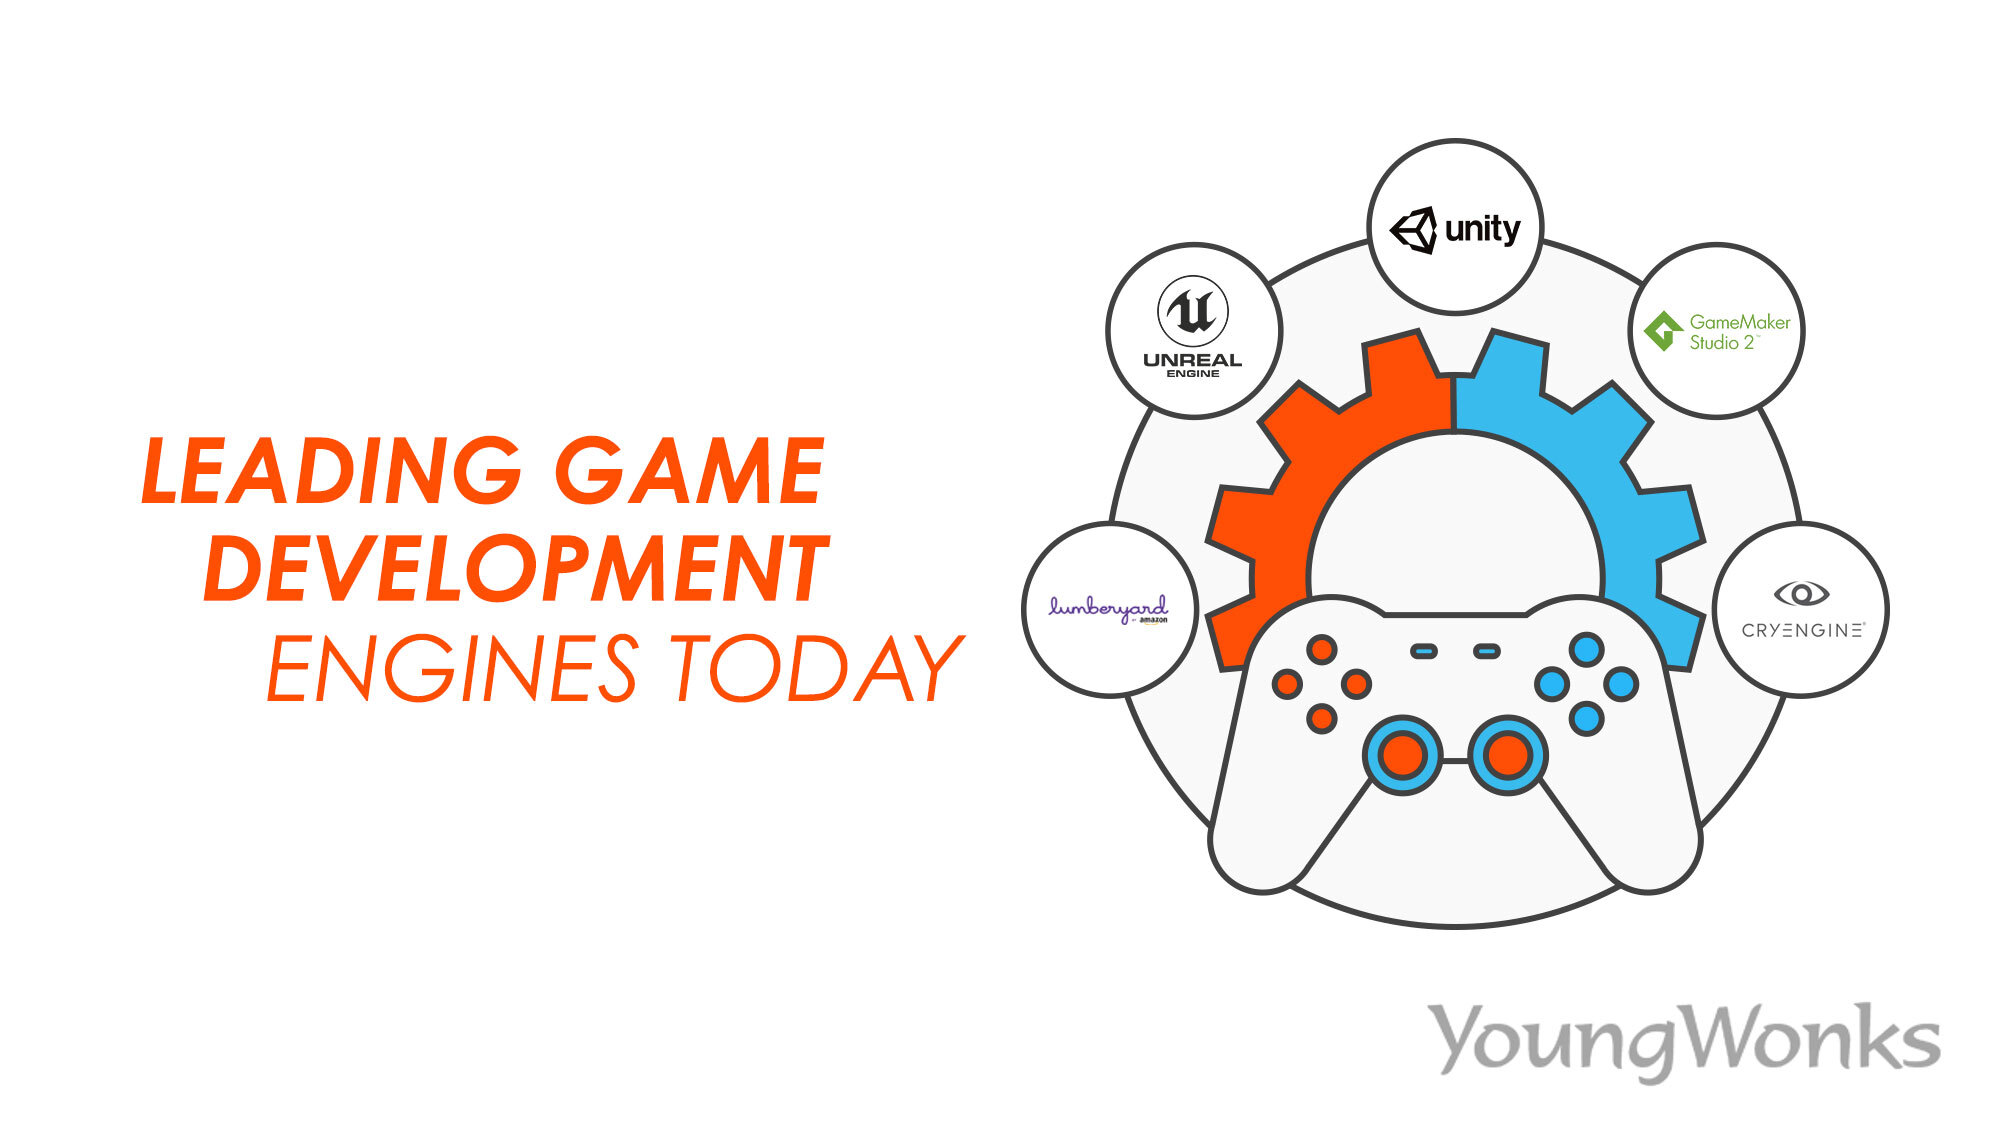 What is Unity Game Engine and Why It Is Used for Game Development?